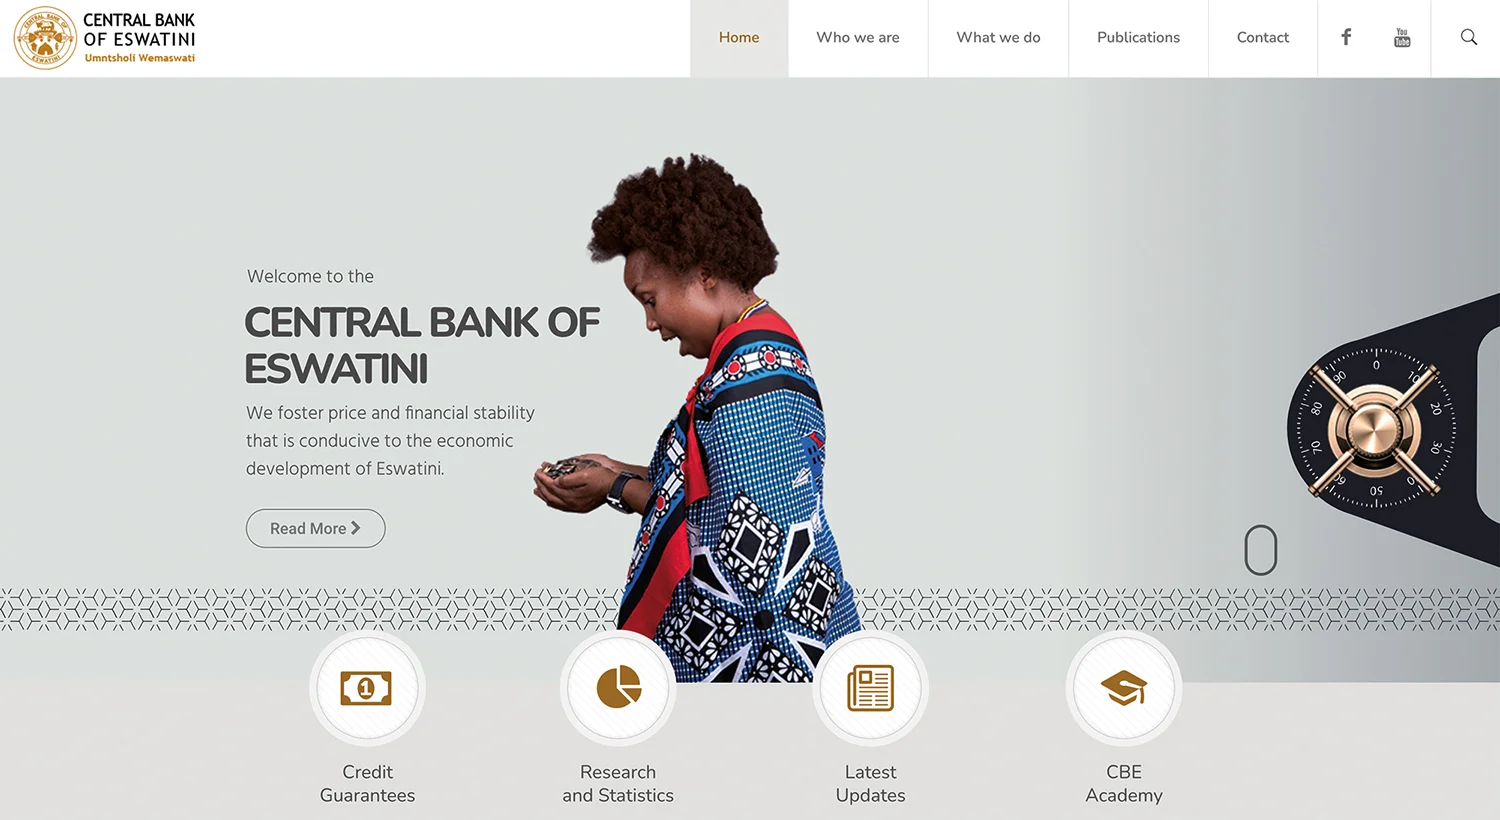 Central Bank of Eswatini website